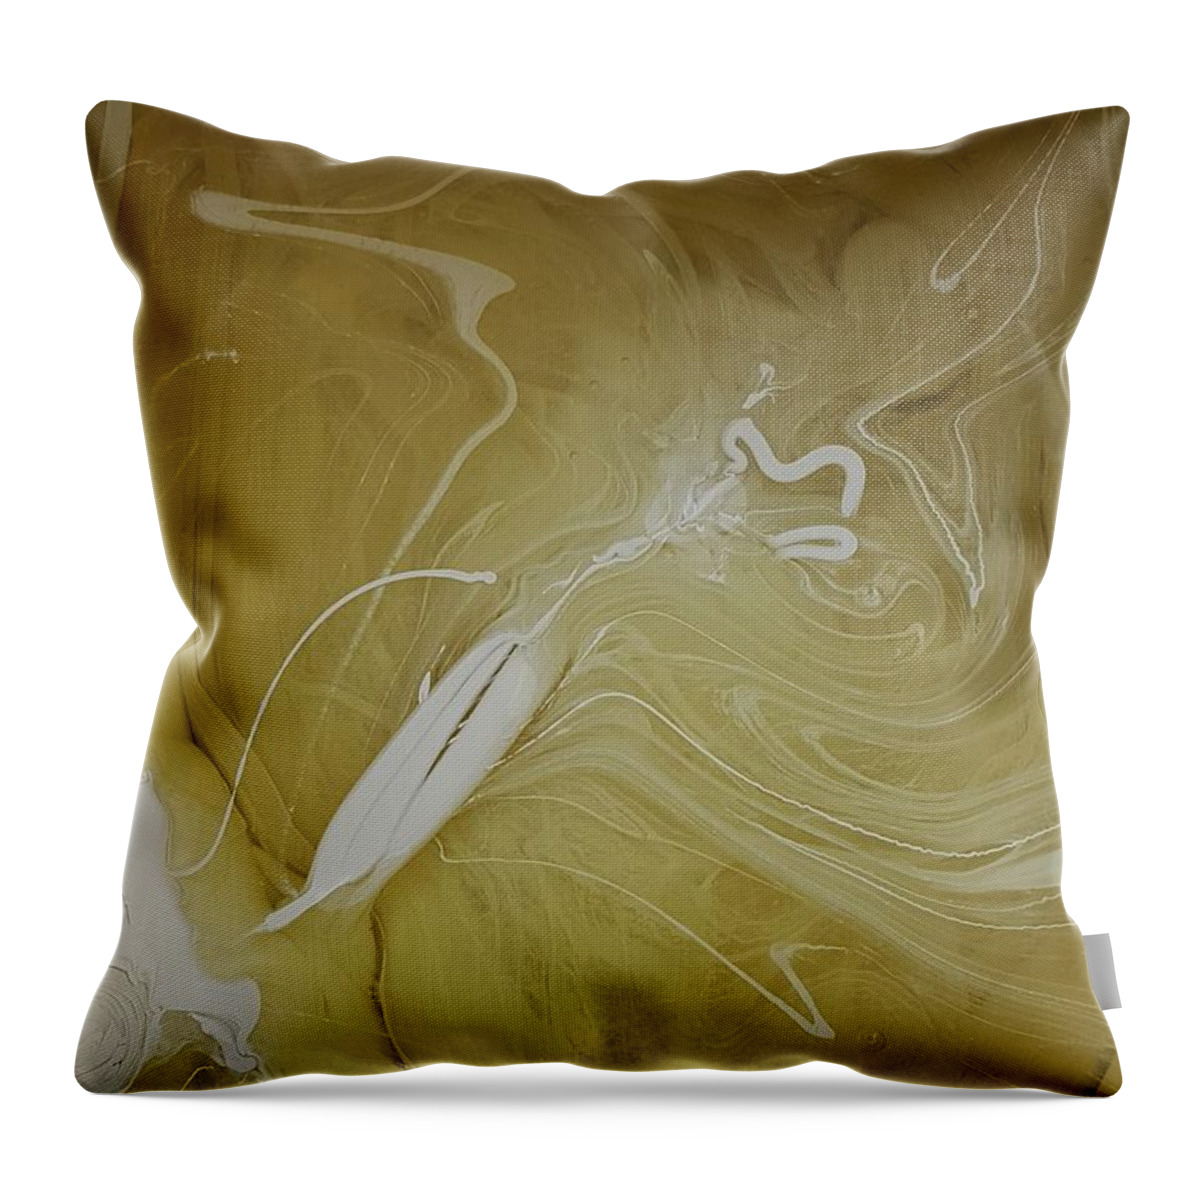  Throw Pillow featuring the painting Sunflower seed birds eye view by Gyula Julian Lovas